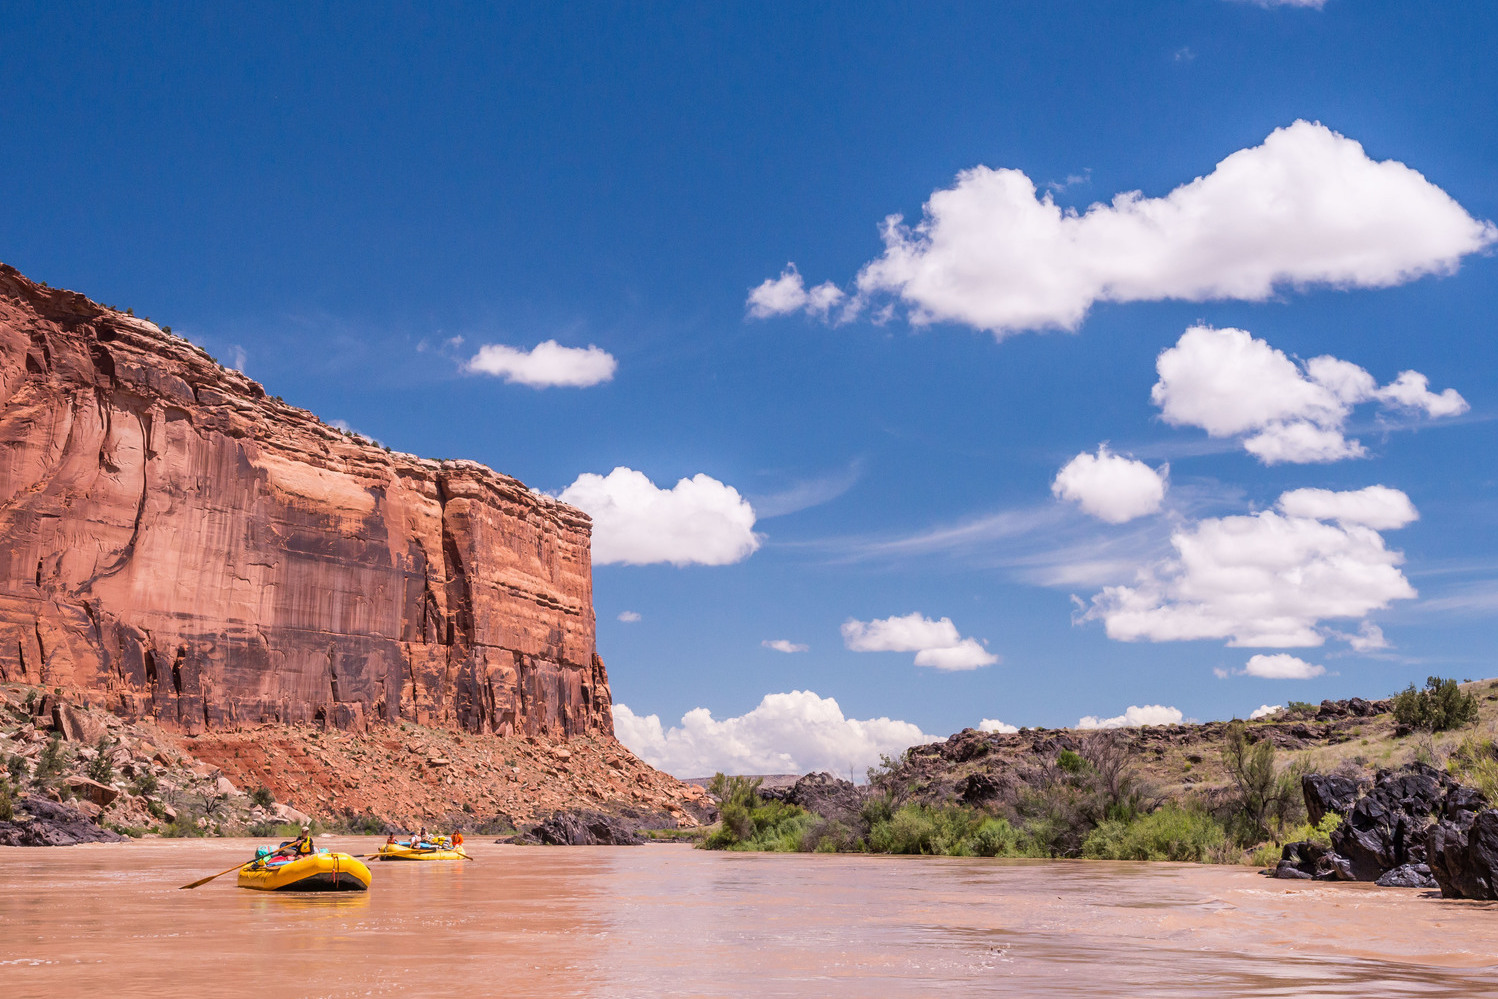 Rafting in Westwater Canyon under blue skies and white clouds